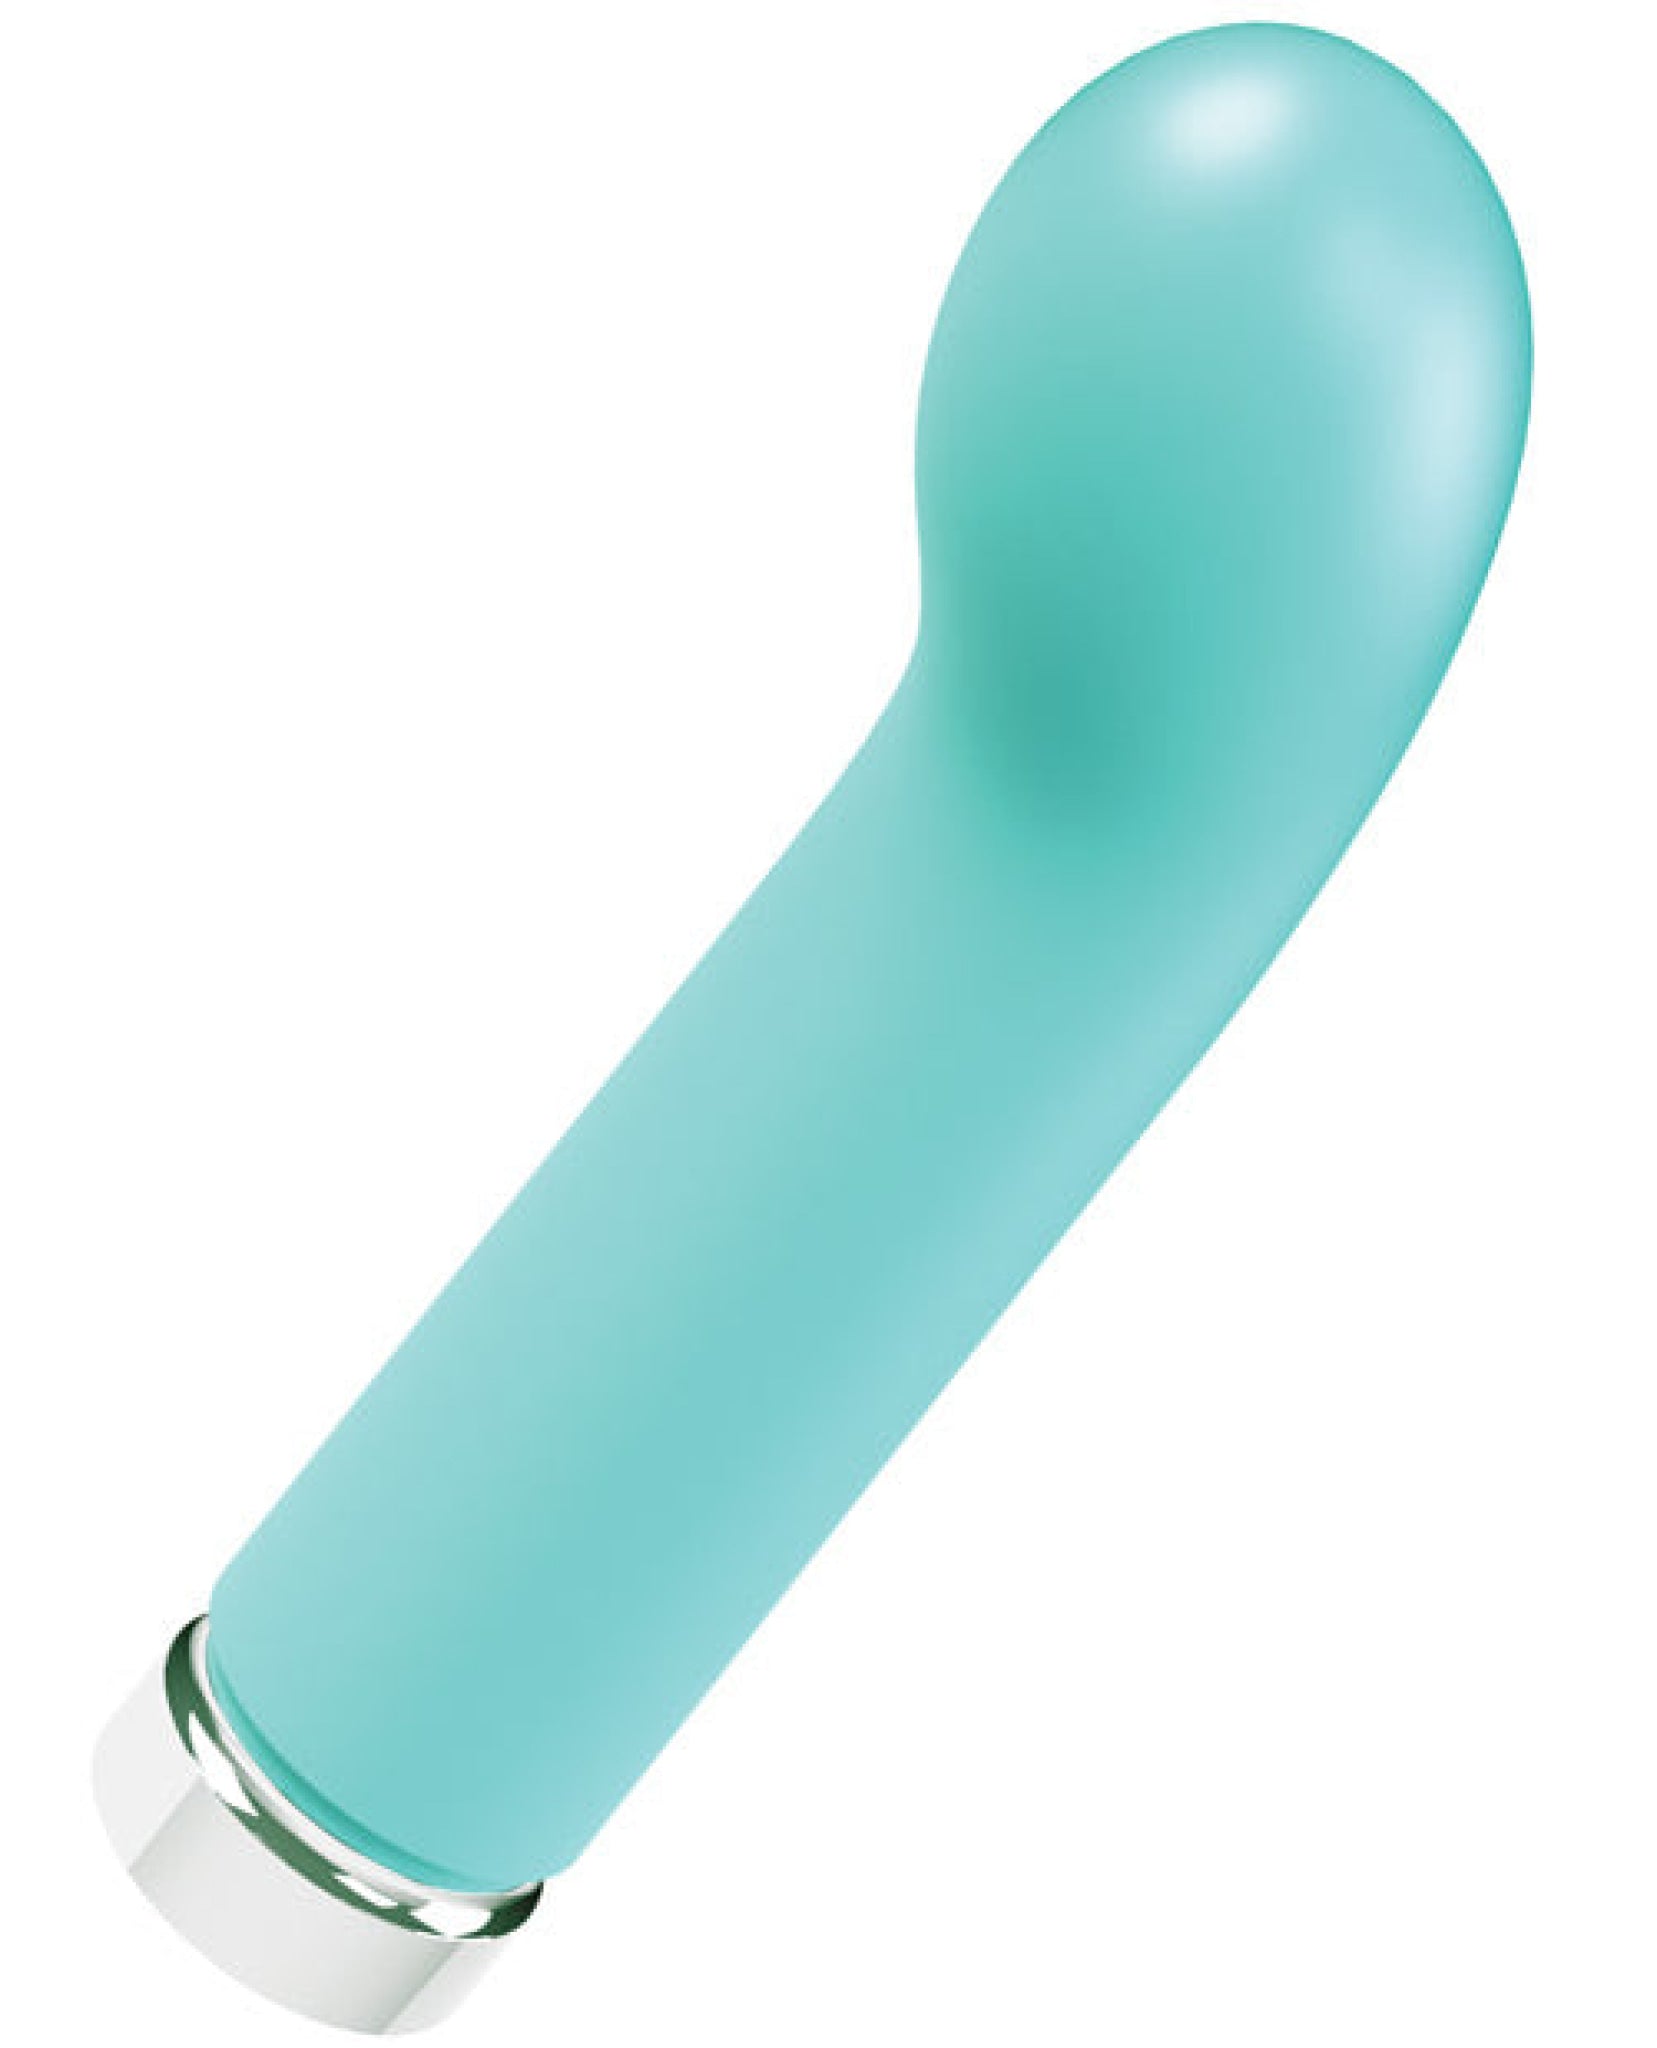 Vedo Gee Plus Rechargeable Vibe - Tease Me Turquoise VēDO